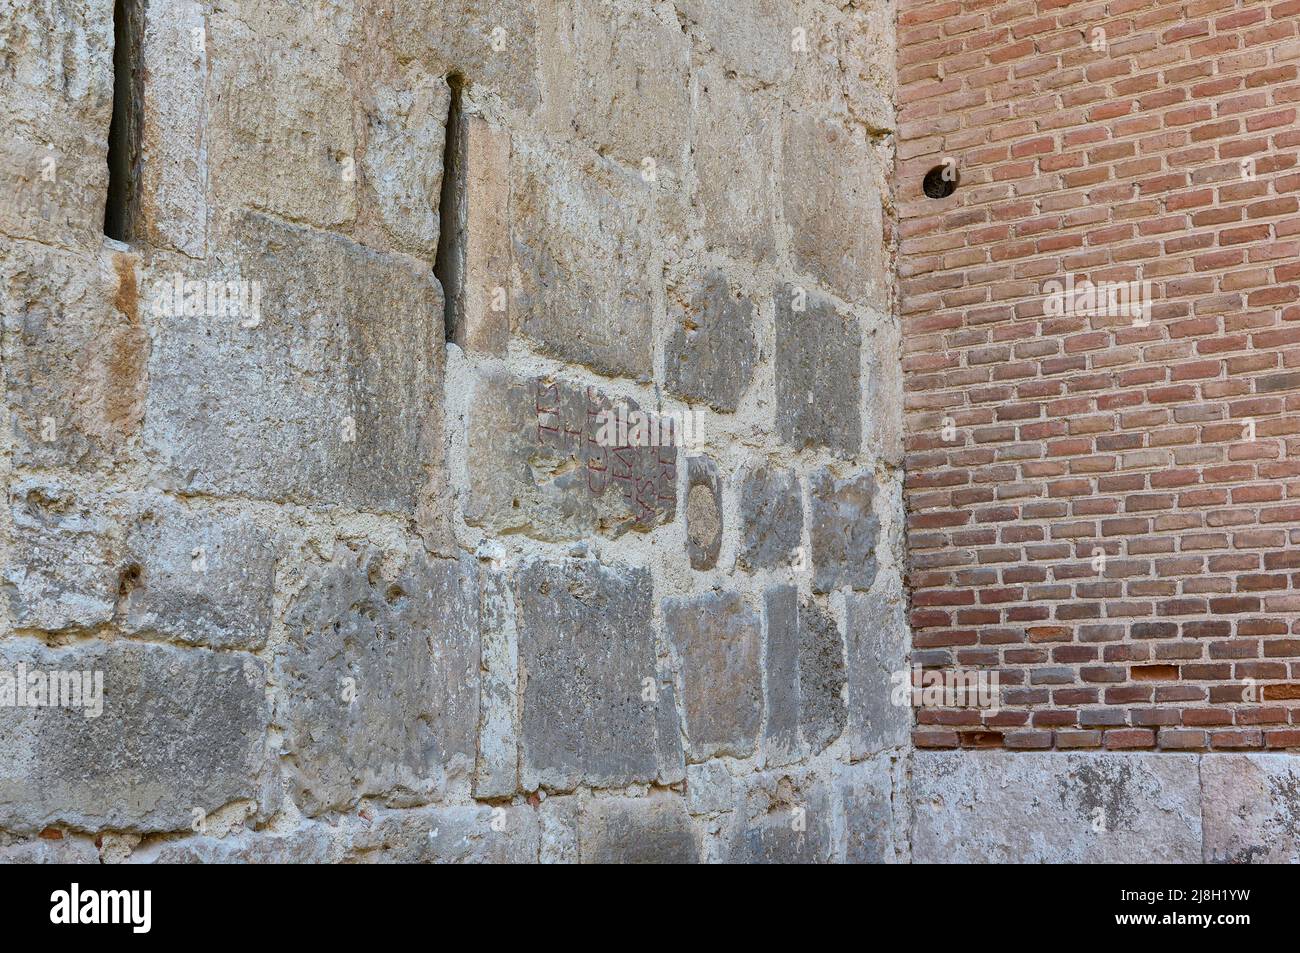 Detail of construction material from Complutum, reused in the Tenorio Tower. Archiepiscopal Palace of Alcala de Henares, Region of Madrid, Spain. Stock Photo